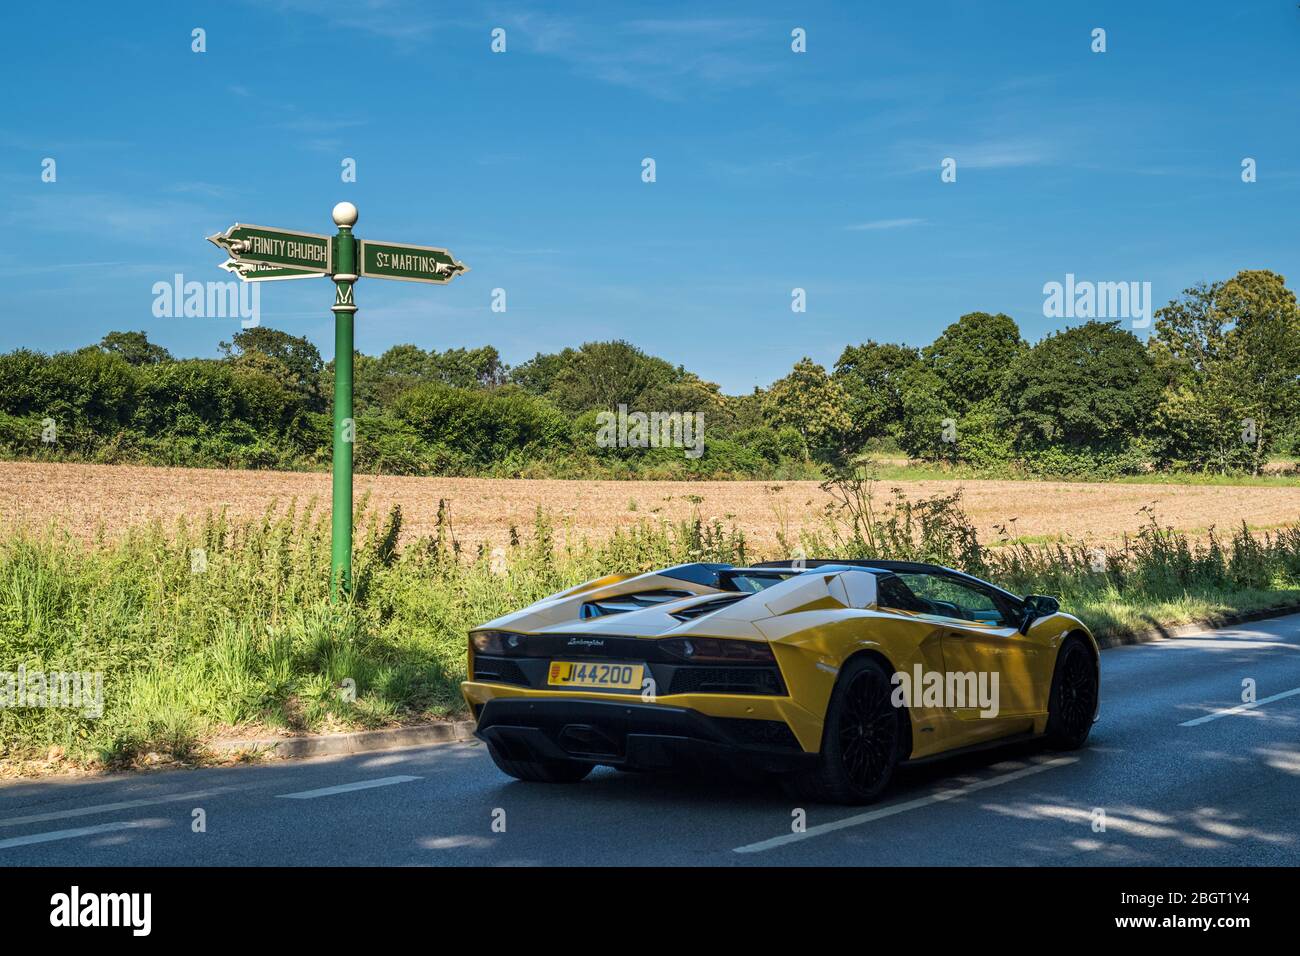 Yellow Lamborghini sports car, Jersey registered number plate, driving past signpost St Martins and Trinity Church in Jersey, Channel Isles Stock Photo